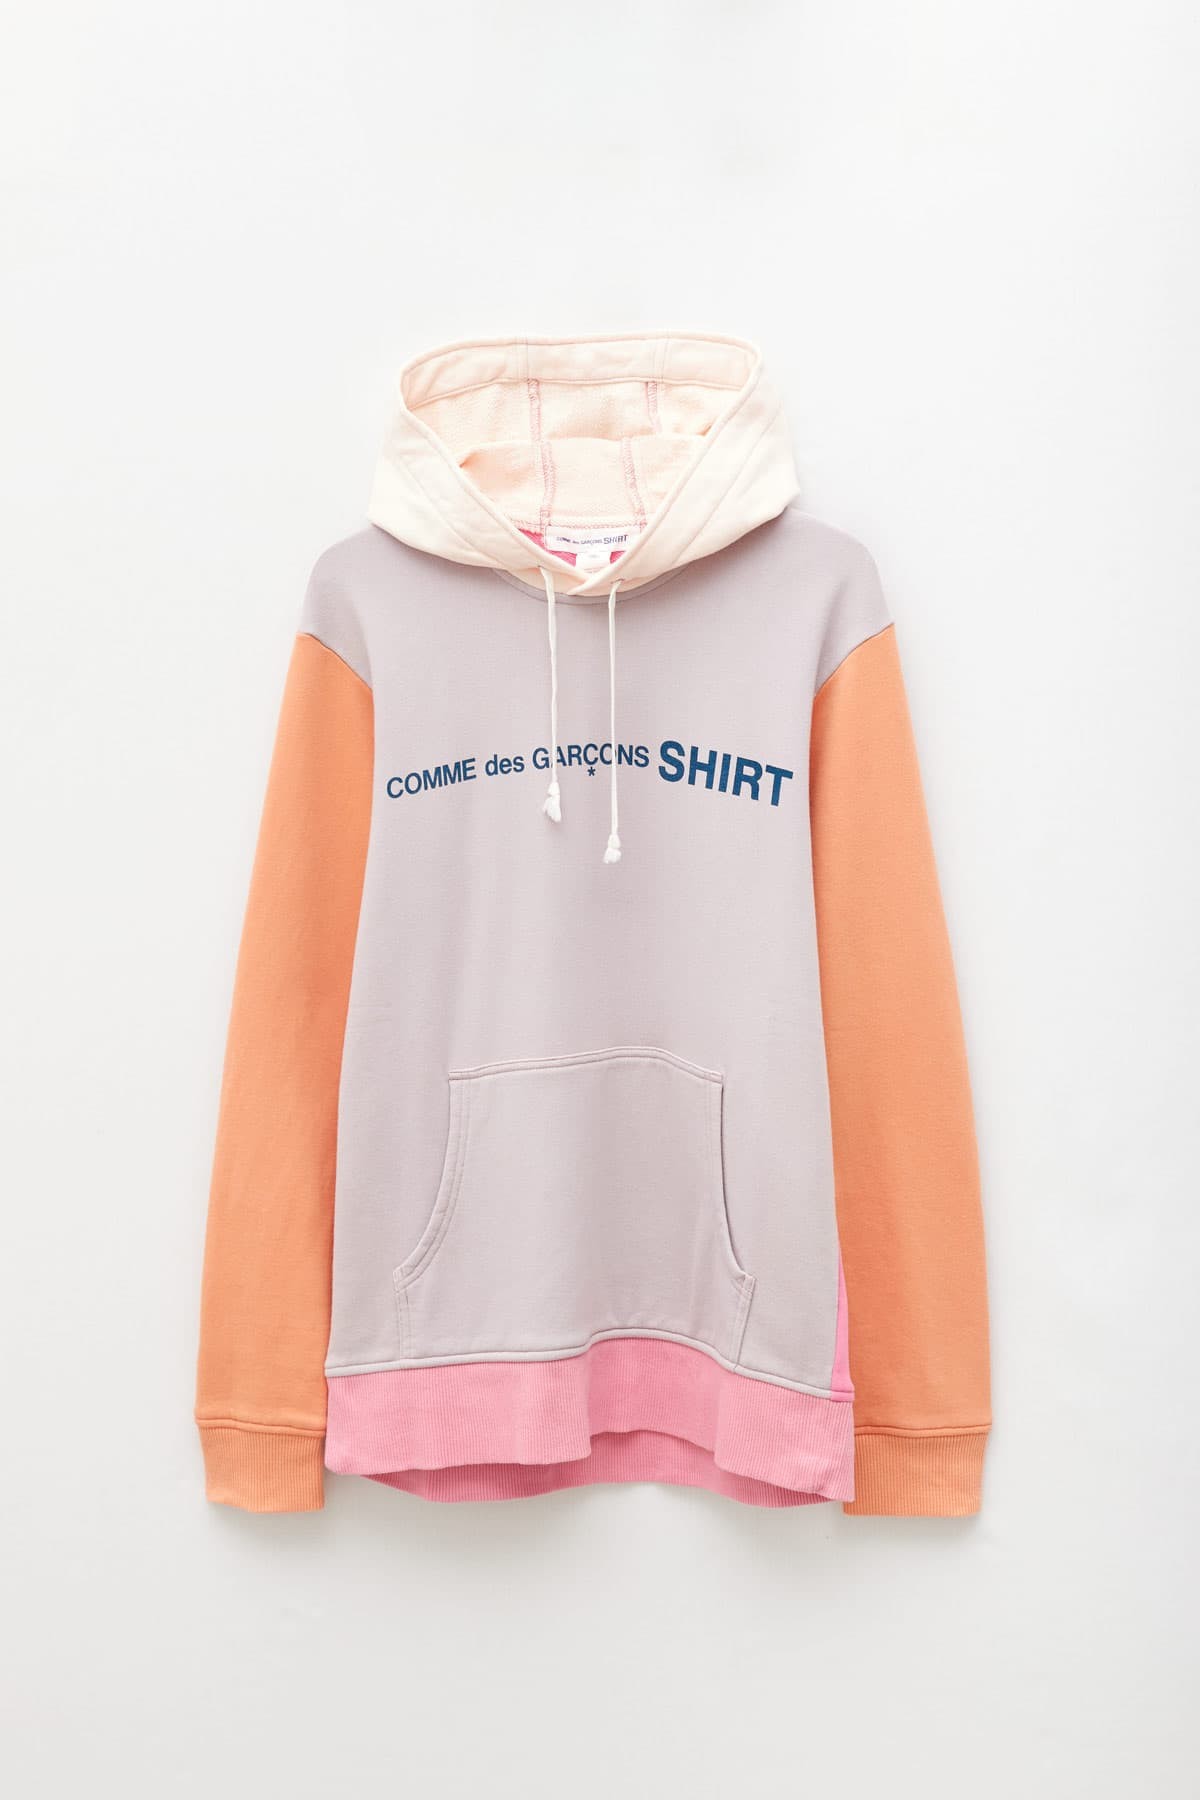 COMME DES GARCONS SHIRT PINK MIX HOODIE IAMNUE